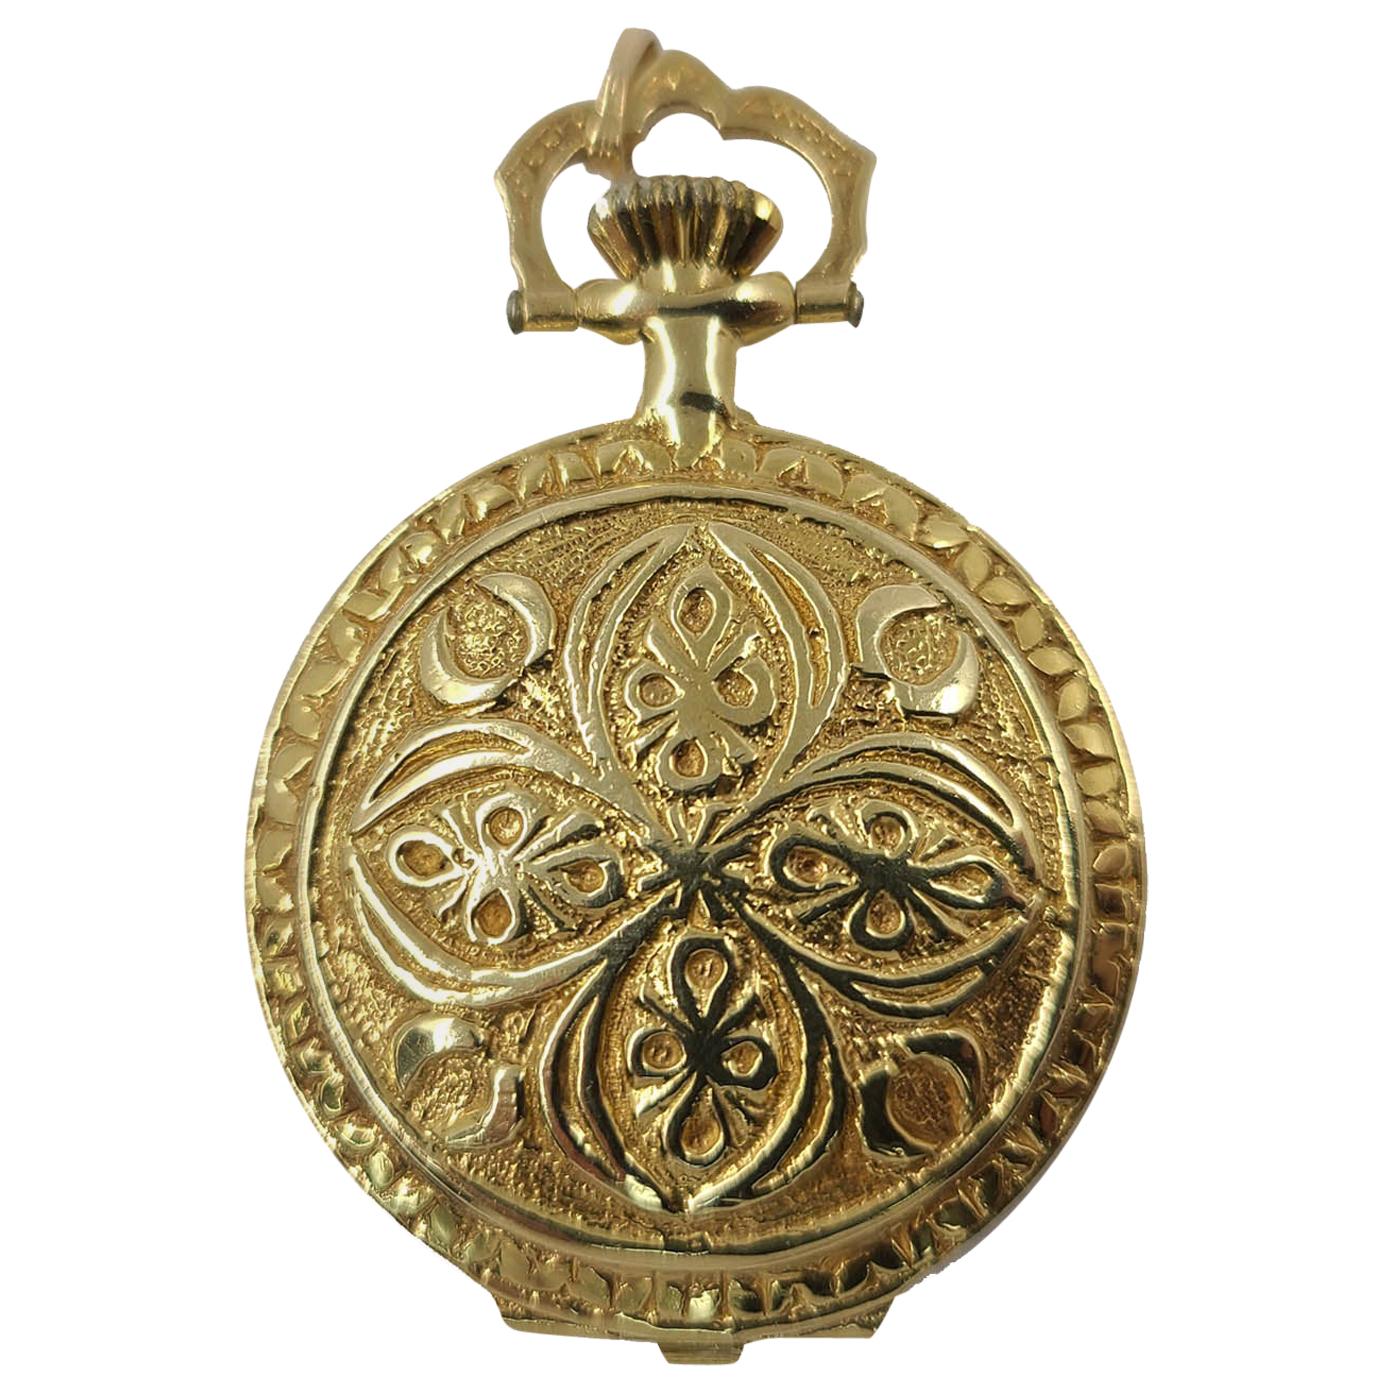 14 Karat Yellow Gold Vega Pocket Watch With Manual Wind Movement. Spring-loaded Hinge Allows For Watch To Pop Up When Opened. The Watch Runs & Keeps Accurate Time. Removable Bale Allows For Wearing As A Necklace Pendant. Finished Weight Is 31.2